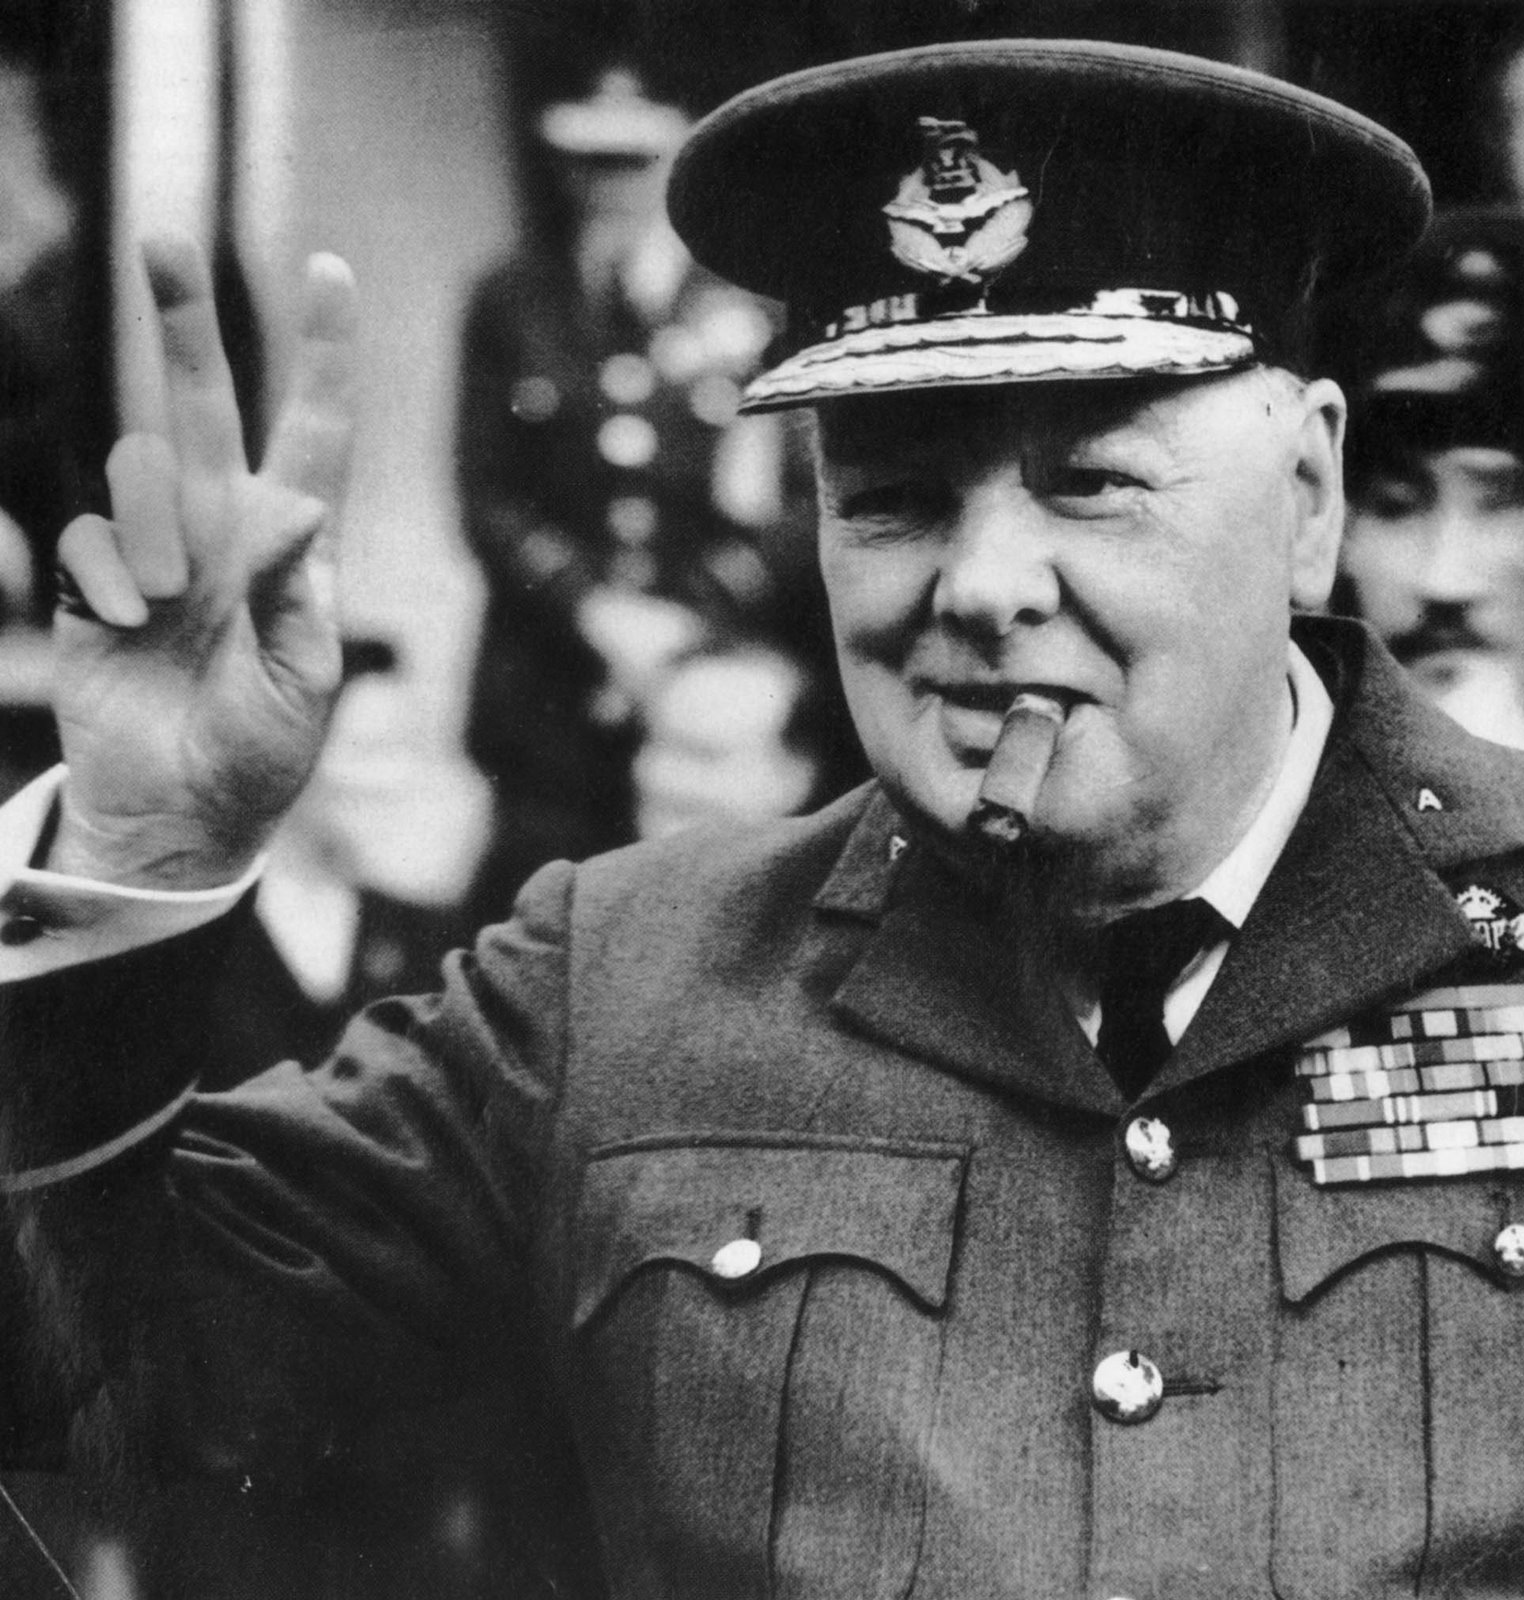 Winston Churchill in Military Garb Shows V-for-Victory Salute